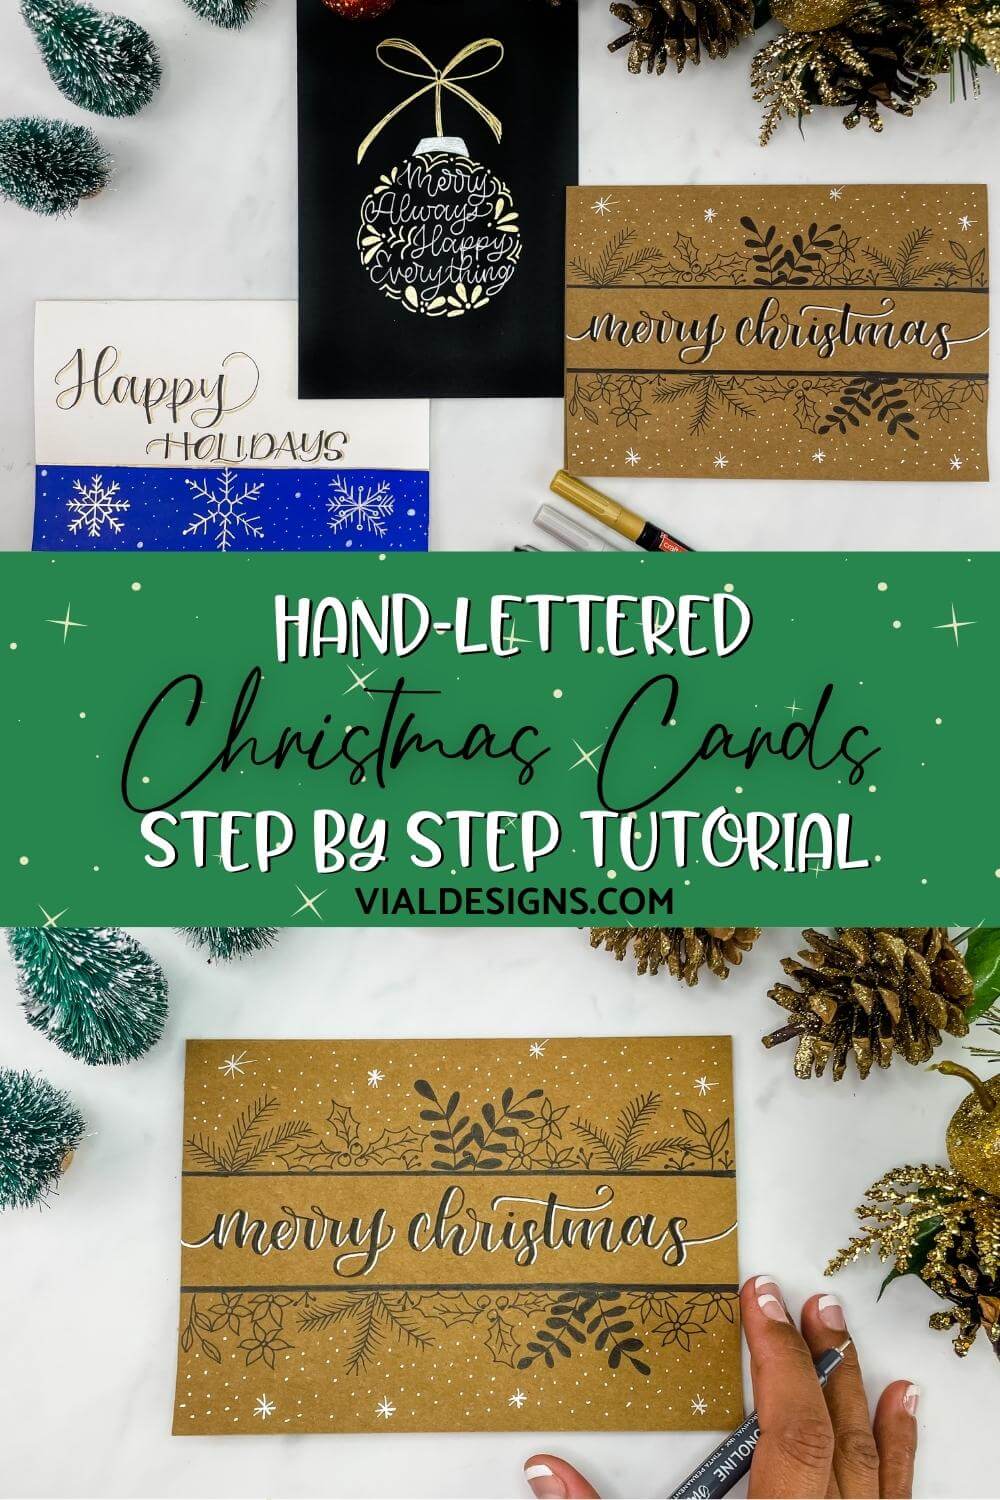 Hand-lettered-christmas-cards-step-by-step-tutorial